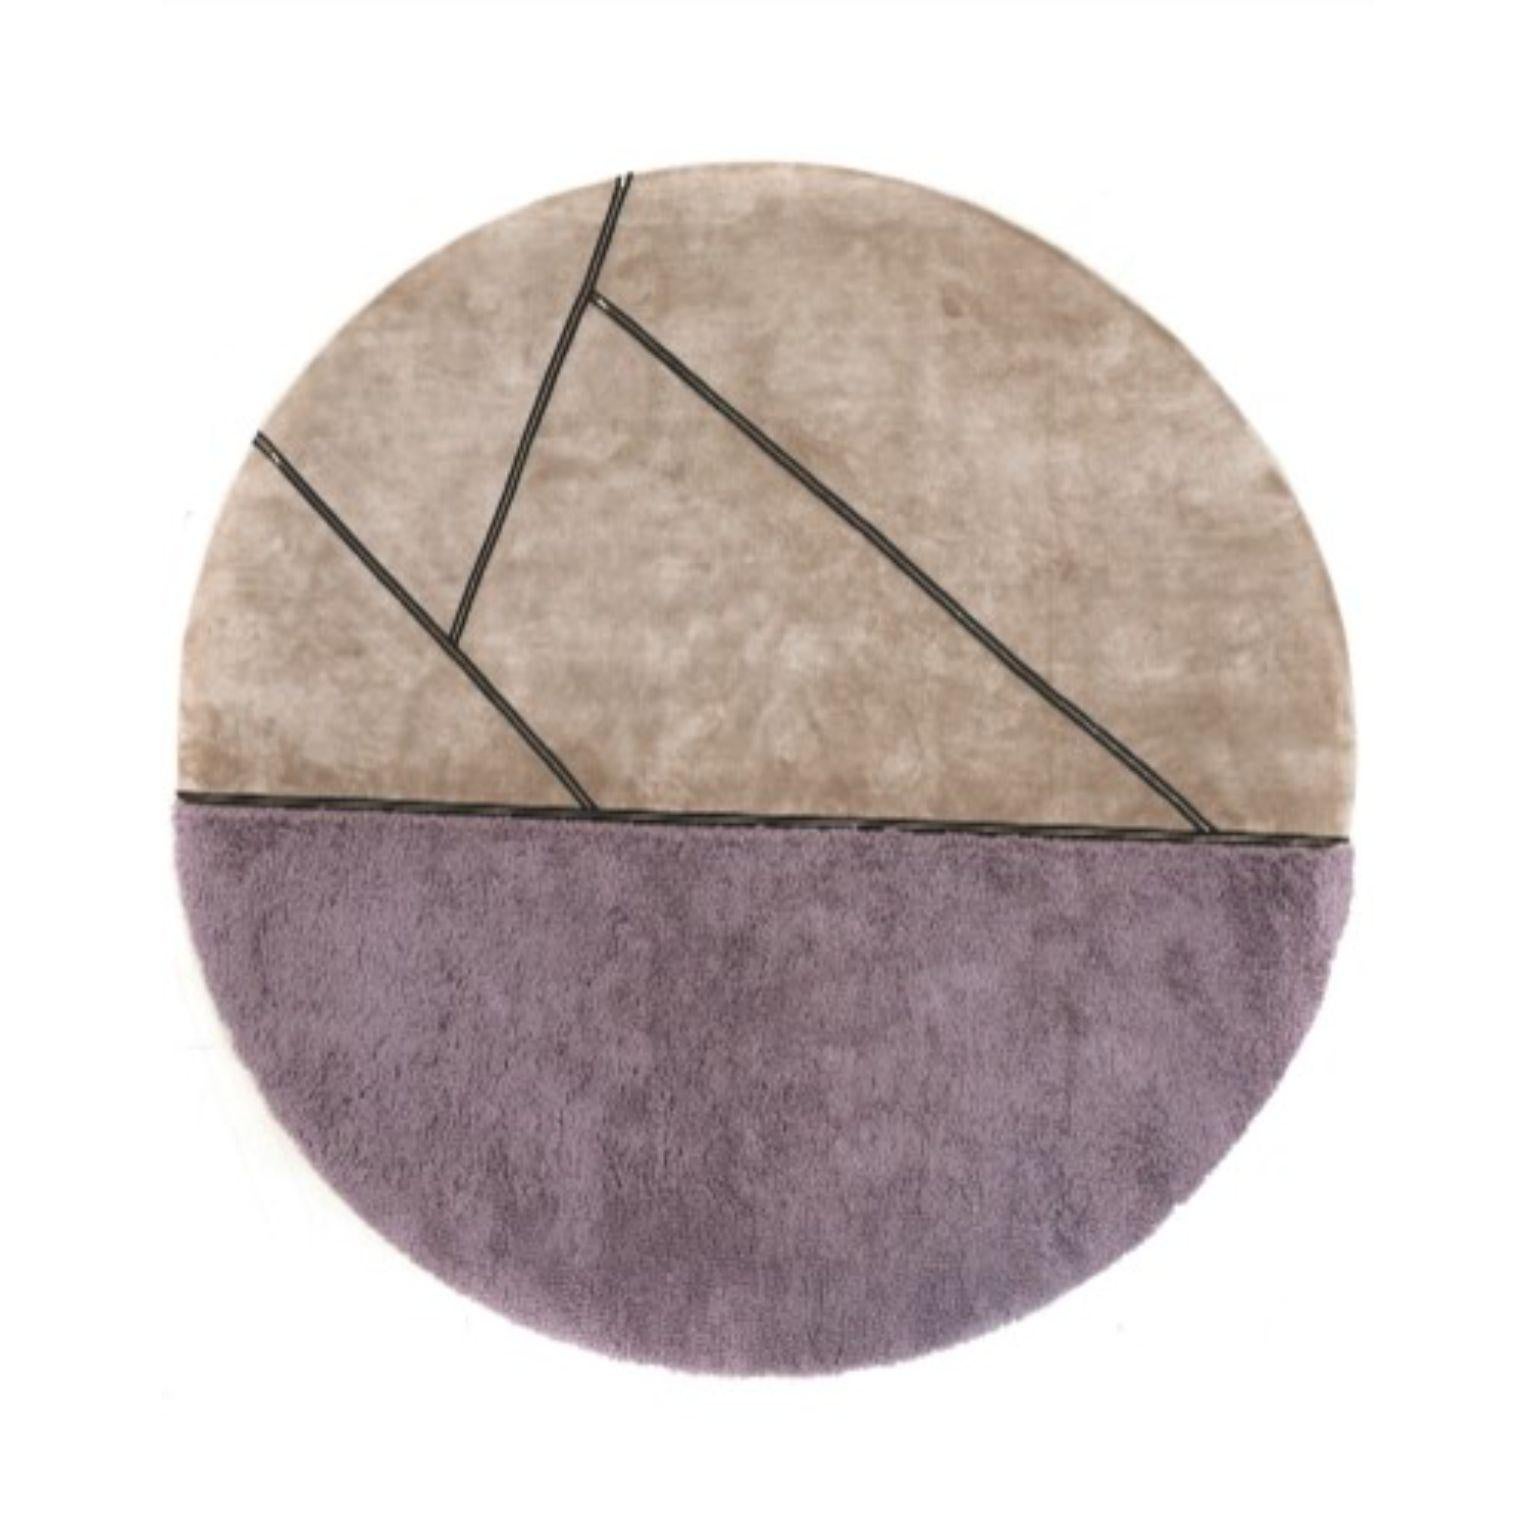 Zipper small rug by Art & Loom
Dimensions: D 243.4 x H 304.8 cm
Materials: New Zealand wool & Chinese silk with exposed brass zipper
Quality (Knots per Inch): 100
Also available in different dimensions.

Samantha Gallacher has always had a keen eye